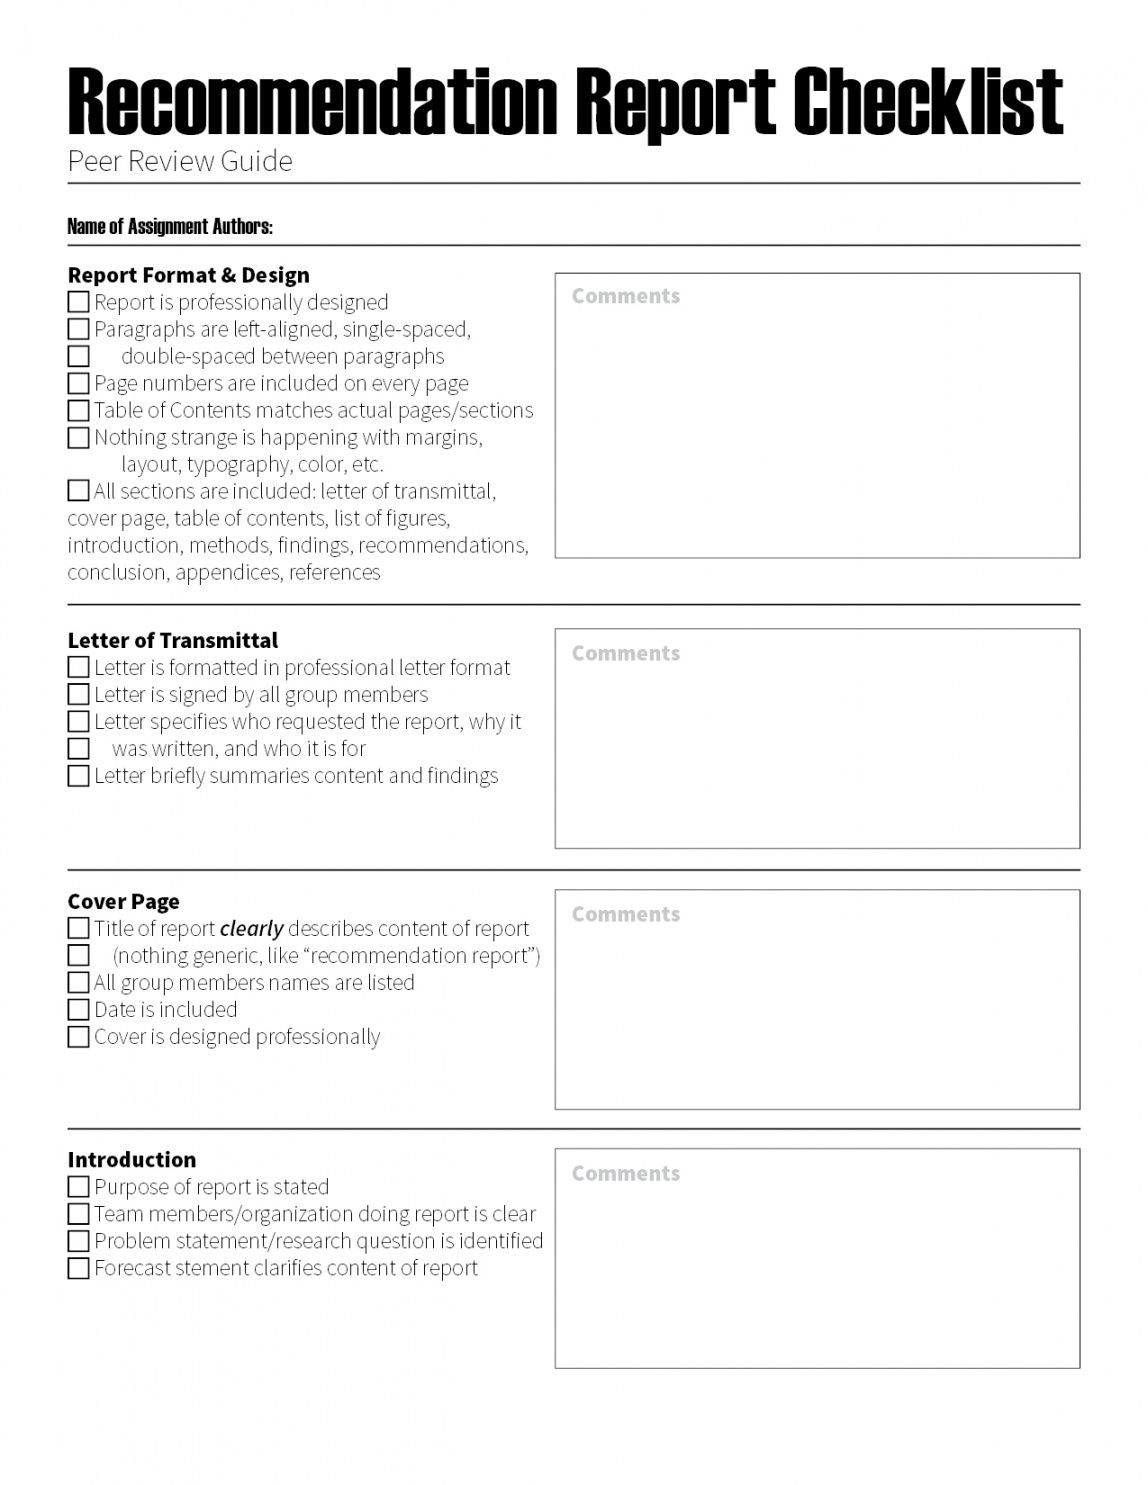 editable recommendation report peer review checklist  the visual business rules analysis template doc